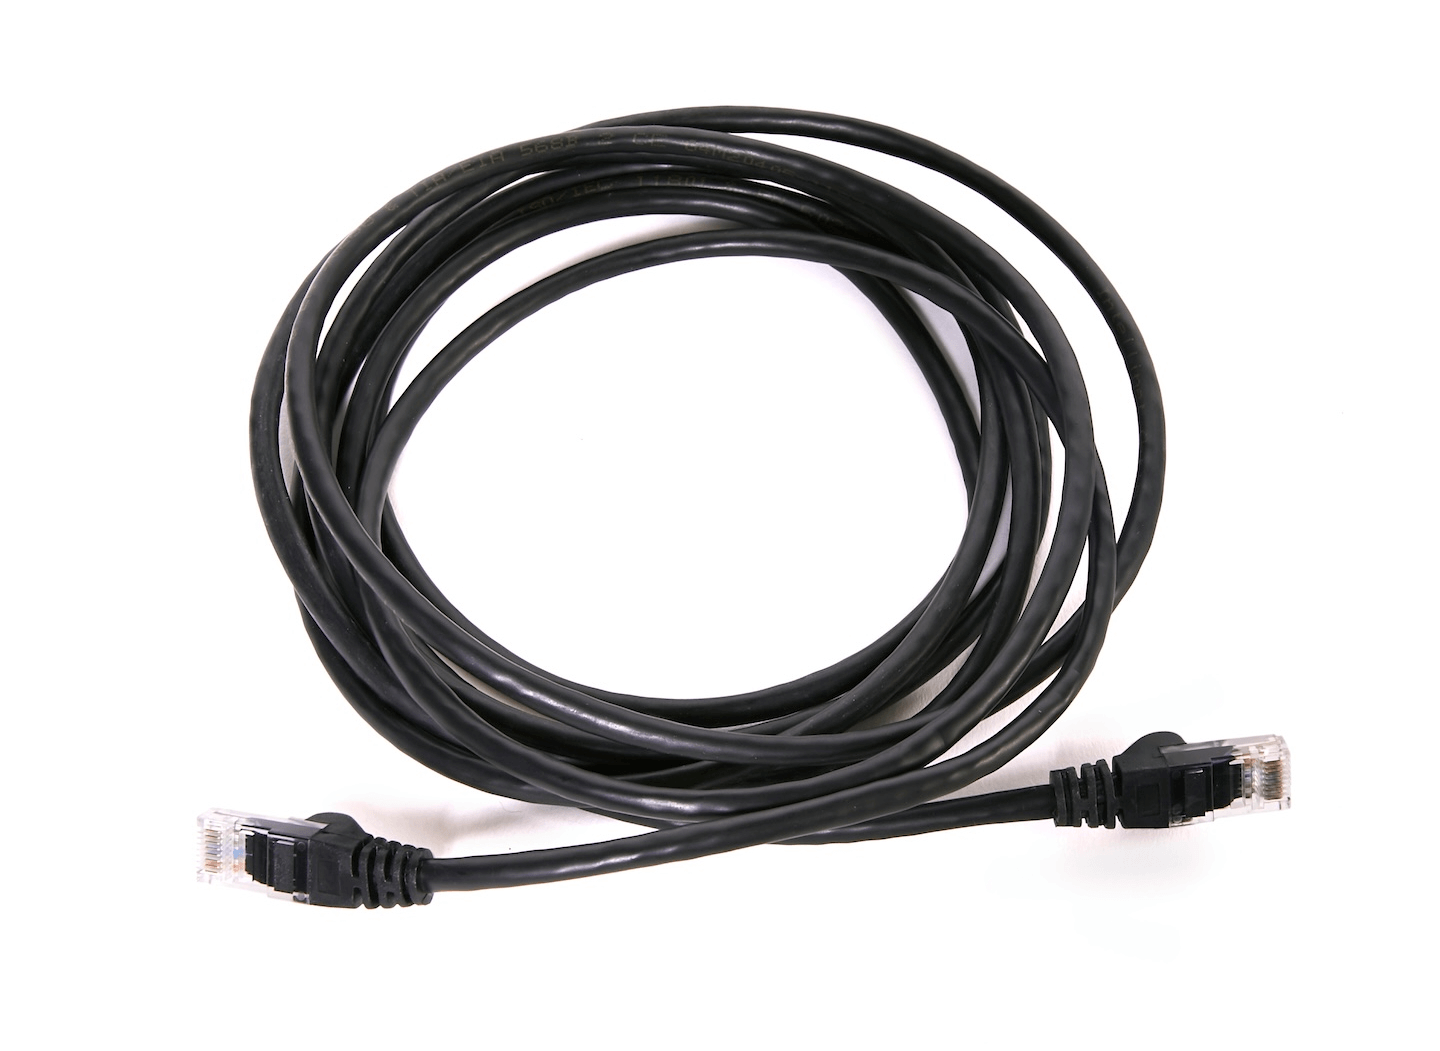 Ethernet (LAN) cable.